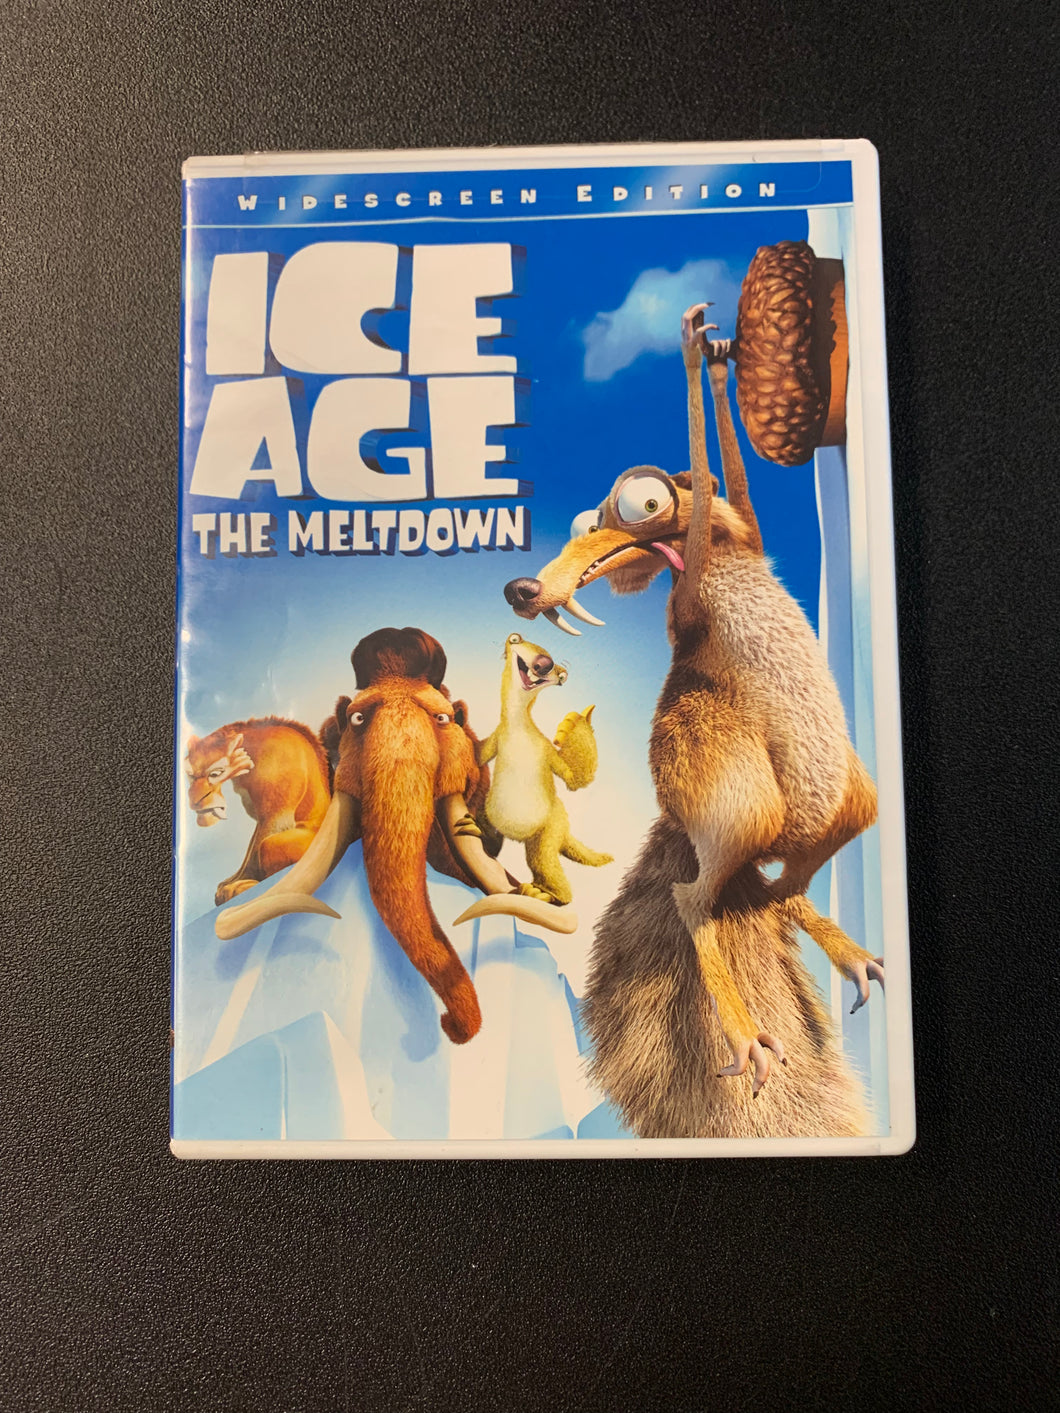 ICE AGE THE MELTDOWN WIDESCREEN EDITION PREOWNED DVD